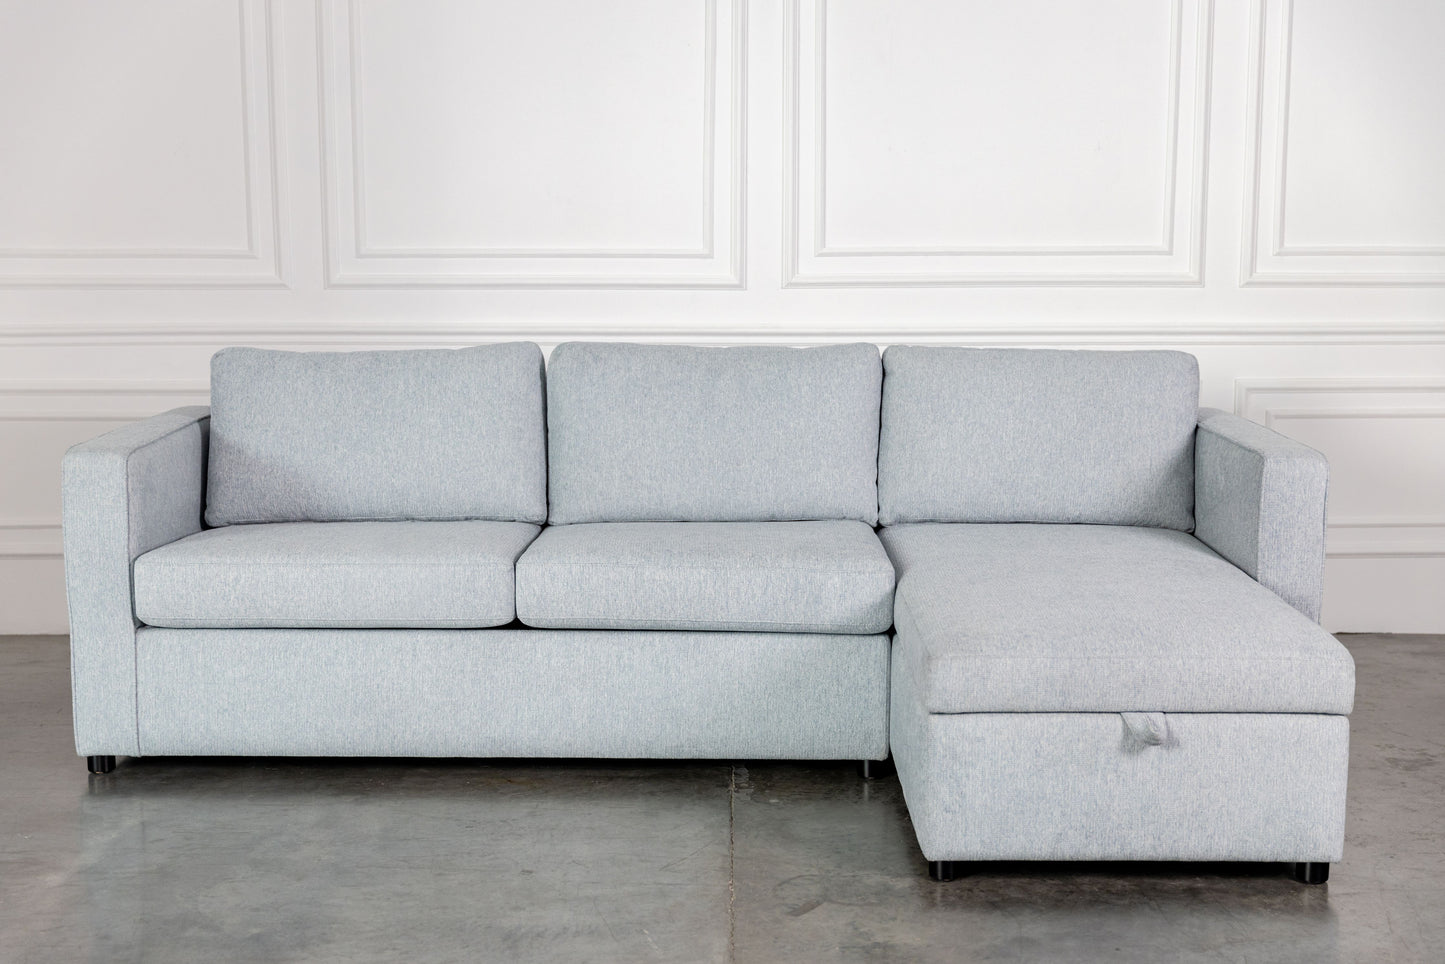 Light Blue 3-seater l-shape comeover sofa bed with storage